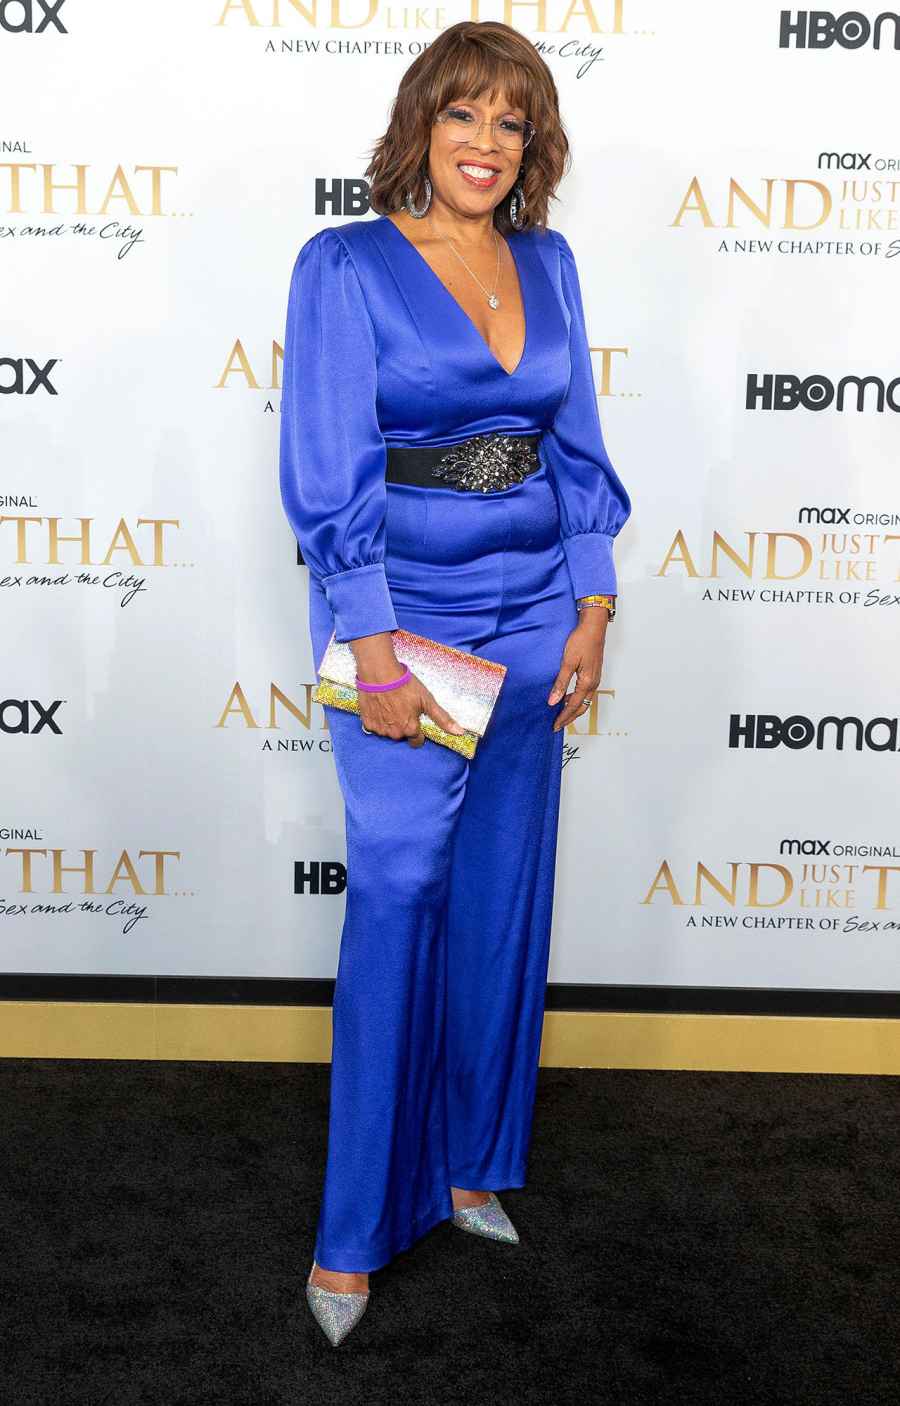 Gayle King What the Stars Wore And Just Like That Premiere HBO Max Red Carpet Arrival